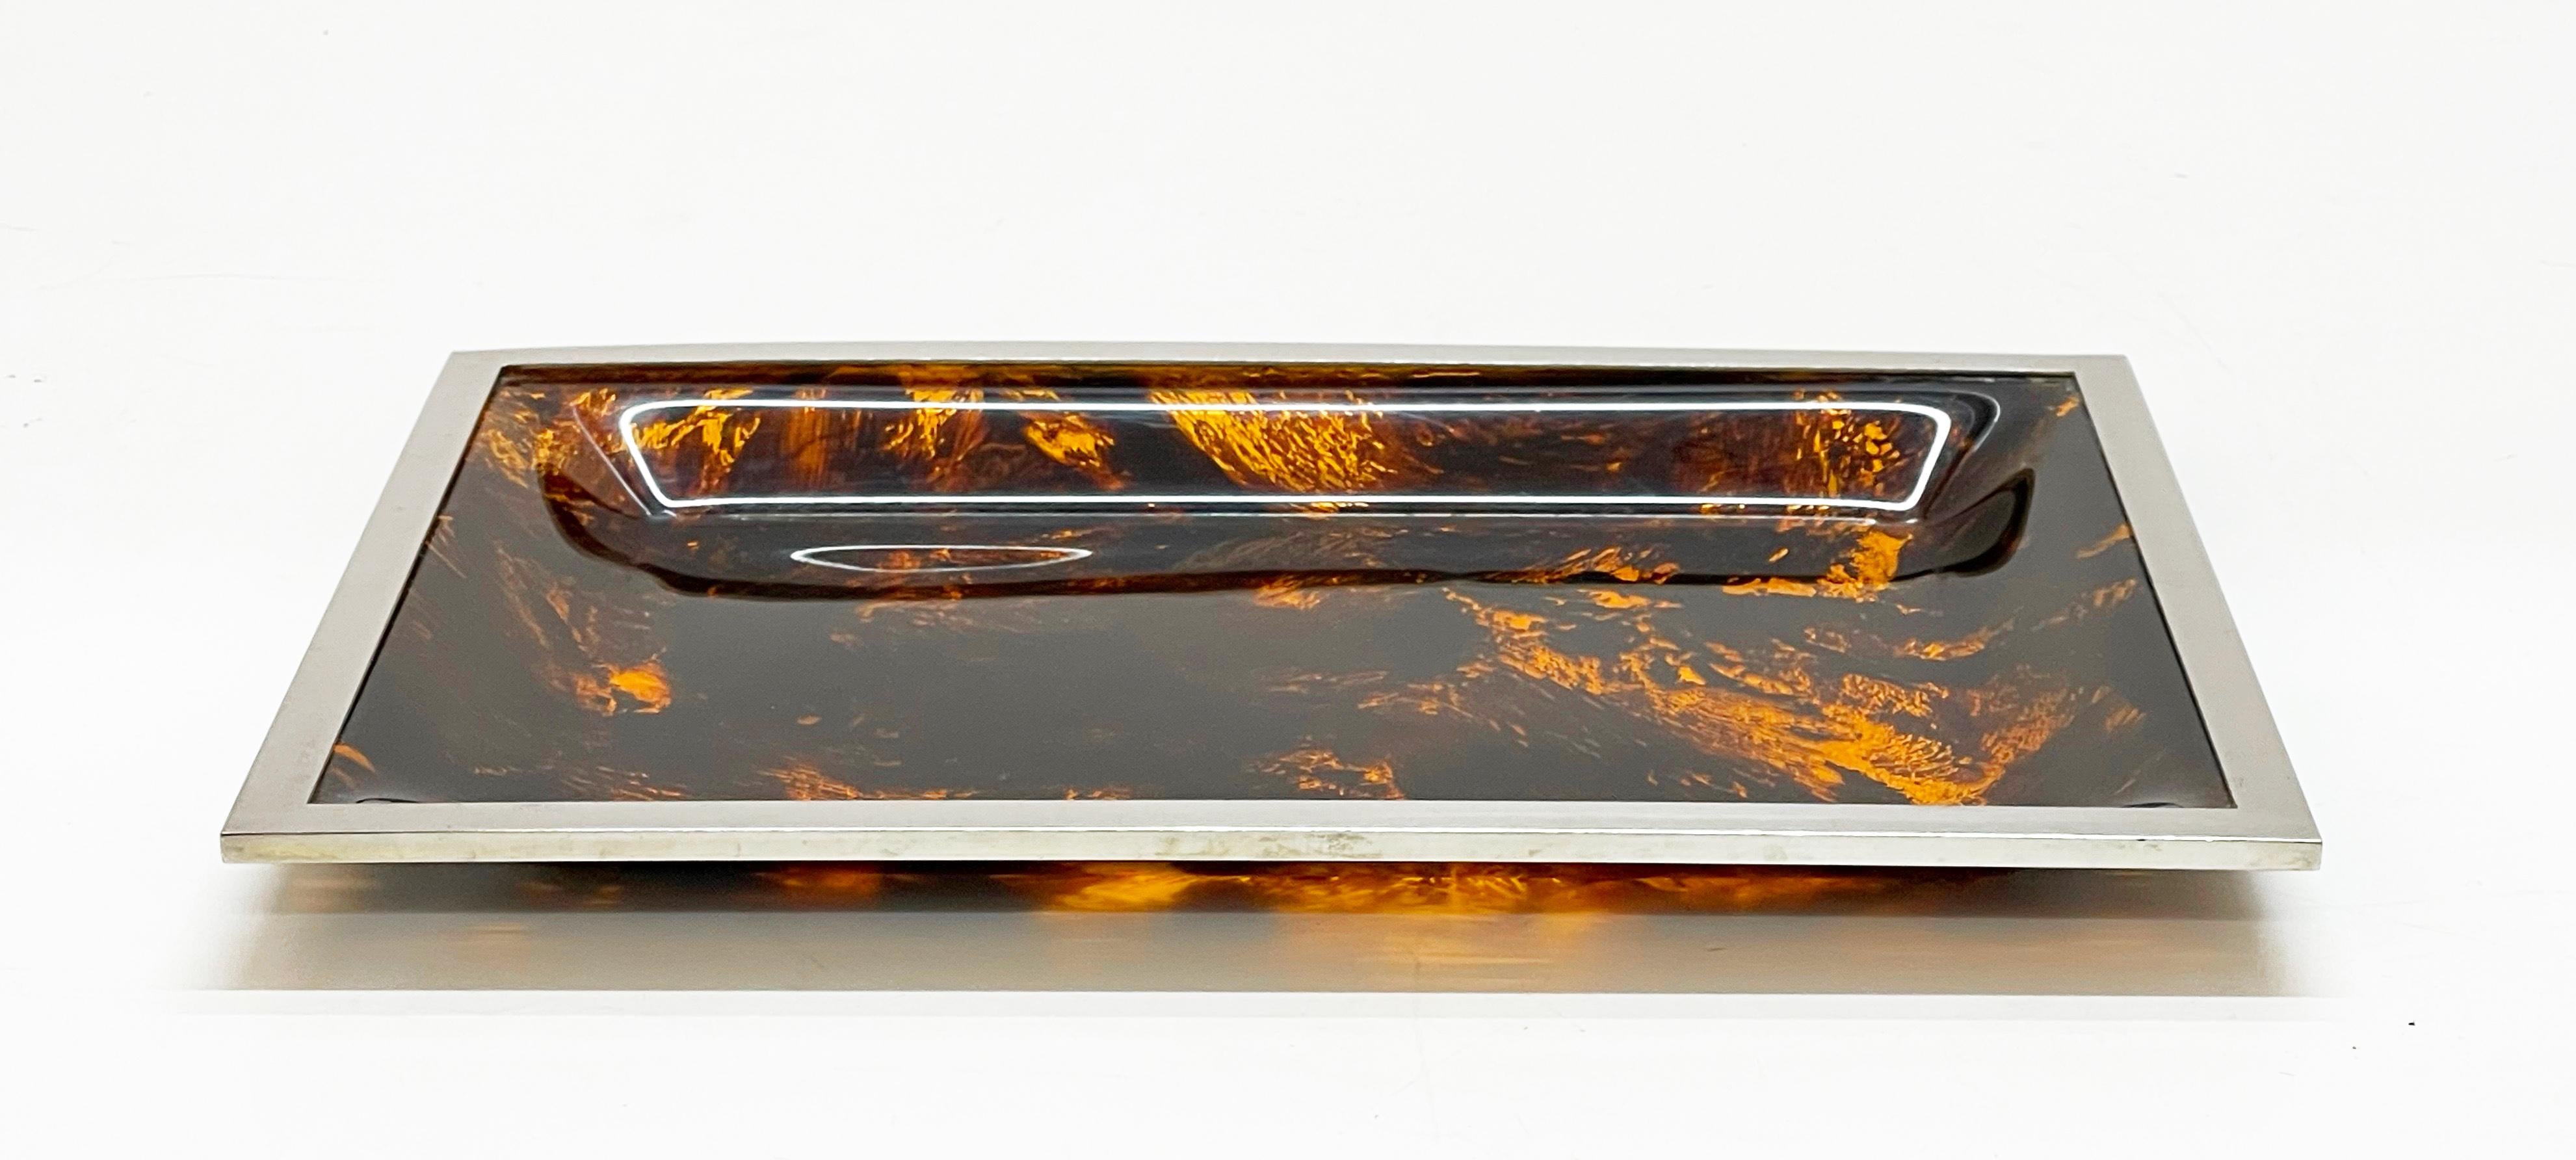 Midcentury Tortoiseshell Plexiglass Italian Serving Tray after Willy Rizzo 1970s For Sale 4